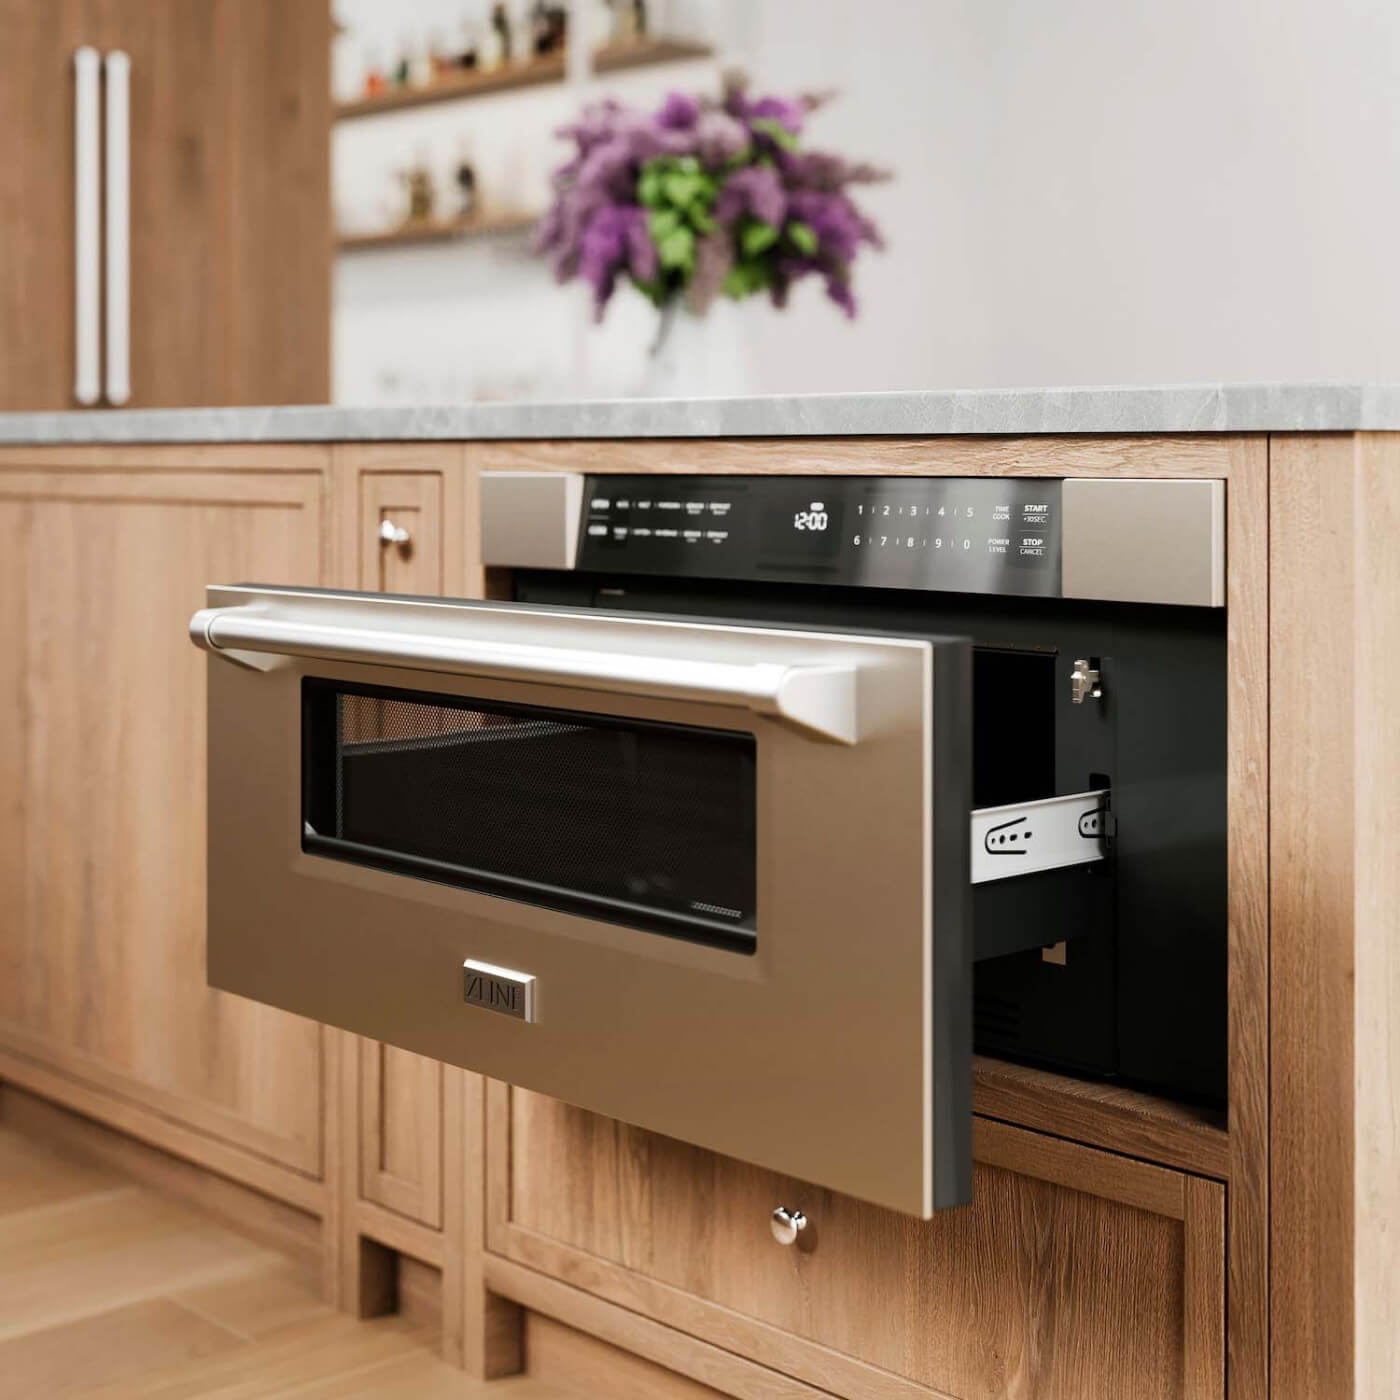 A modern ZLINE 30-inch built-in microwave drawer made of stainless steel, integrated within light wood cabinetry in a stylish kitchen, with a focus on the sleek handle and digital control panel